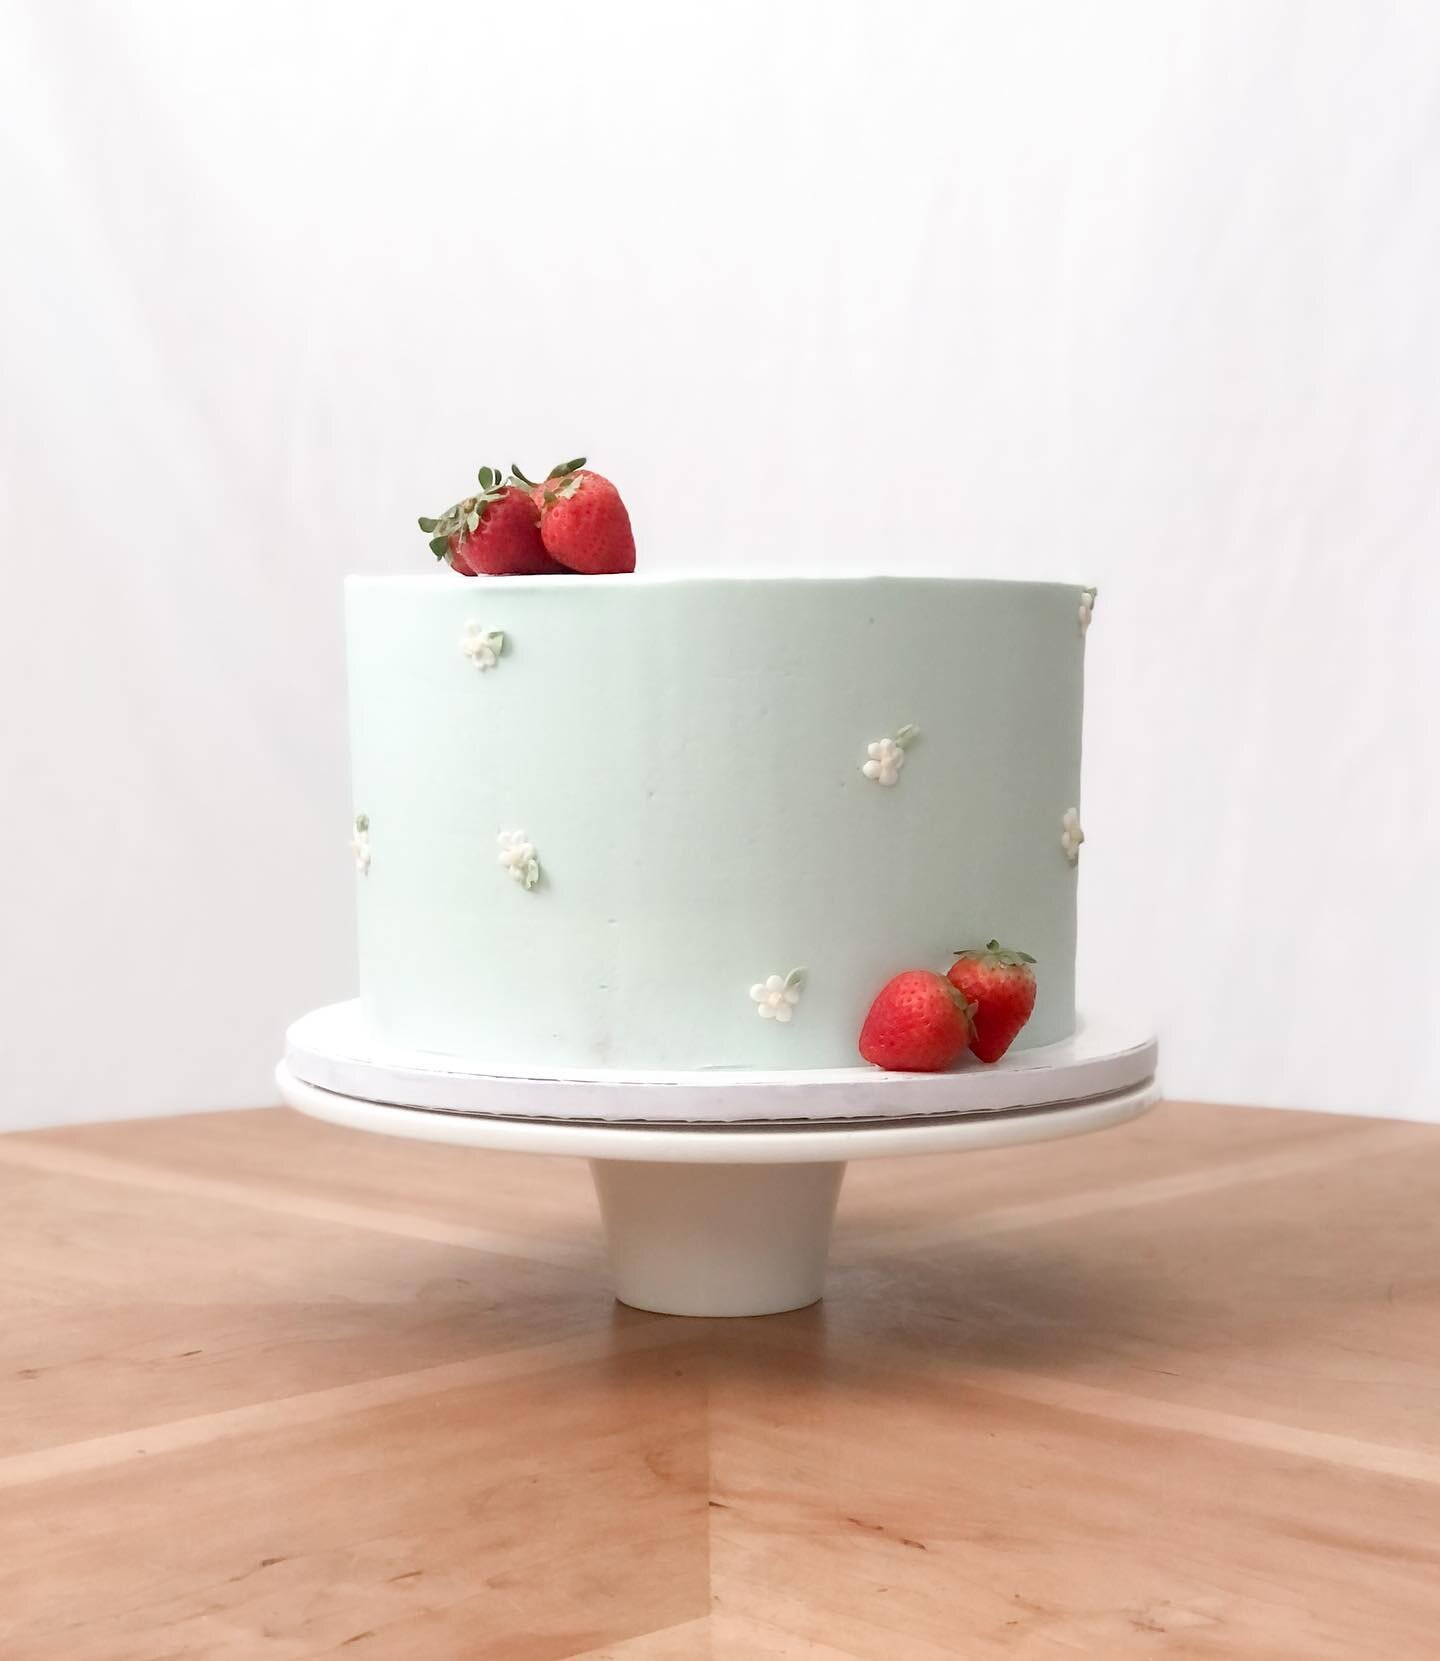 Strawberry Cutie 🍓 

10 &ldquo; Classic Cake &mdash; Strawberry Cake Flavor frosted in a vanilla buttercream. 

I love this one so &ldquo;berry&rdquo; much! I&rsquo;m so glad I can finally get it on our page officially! And a matching cake flavor in